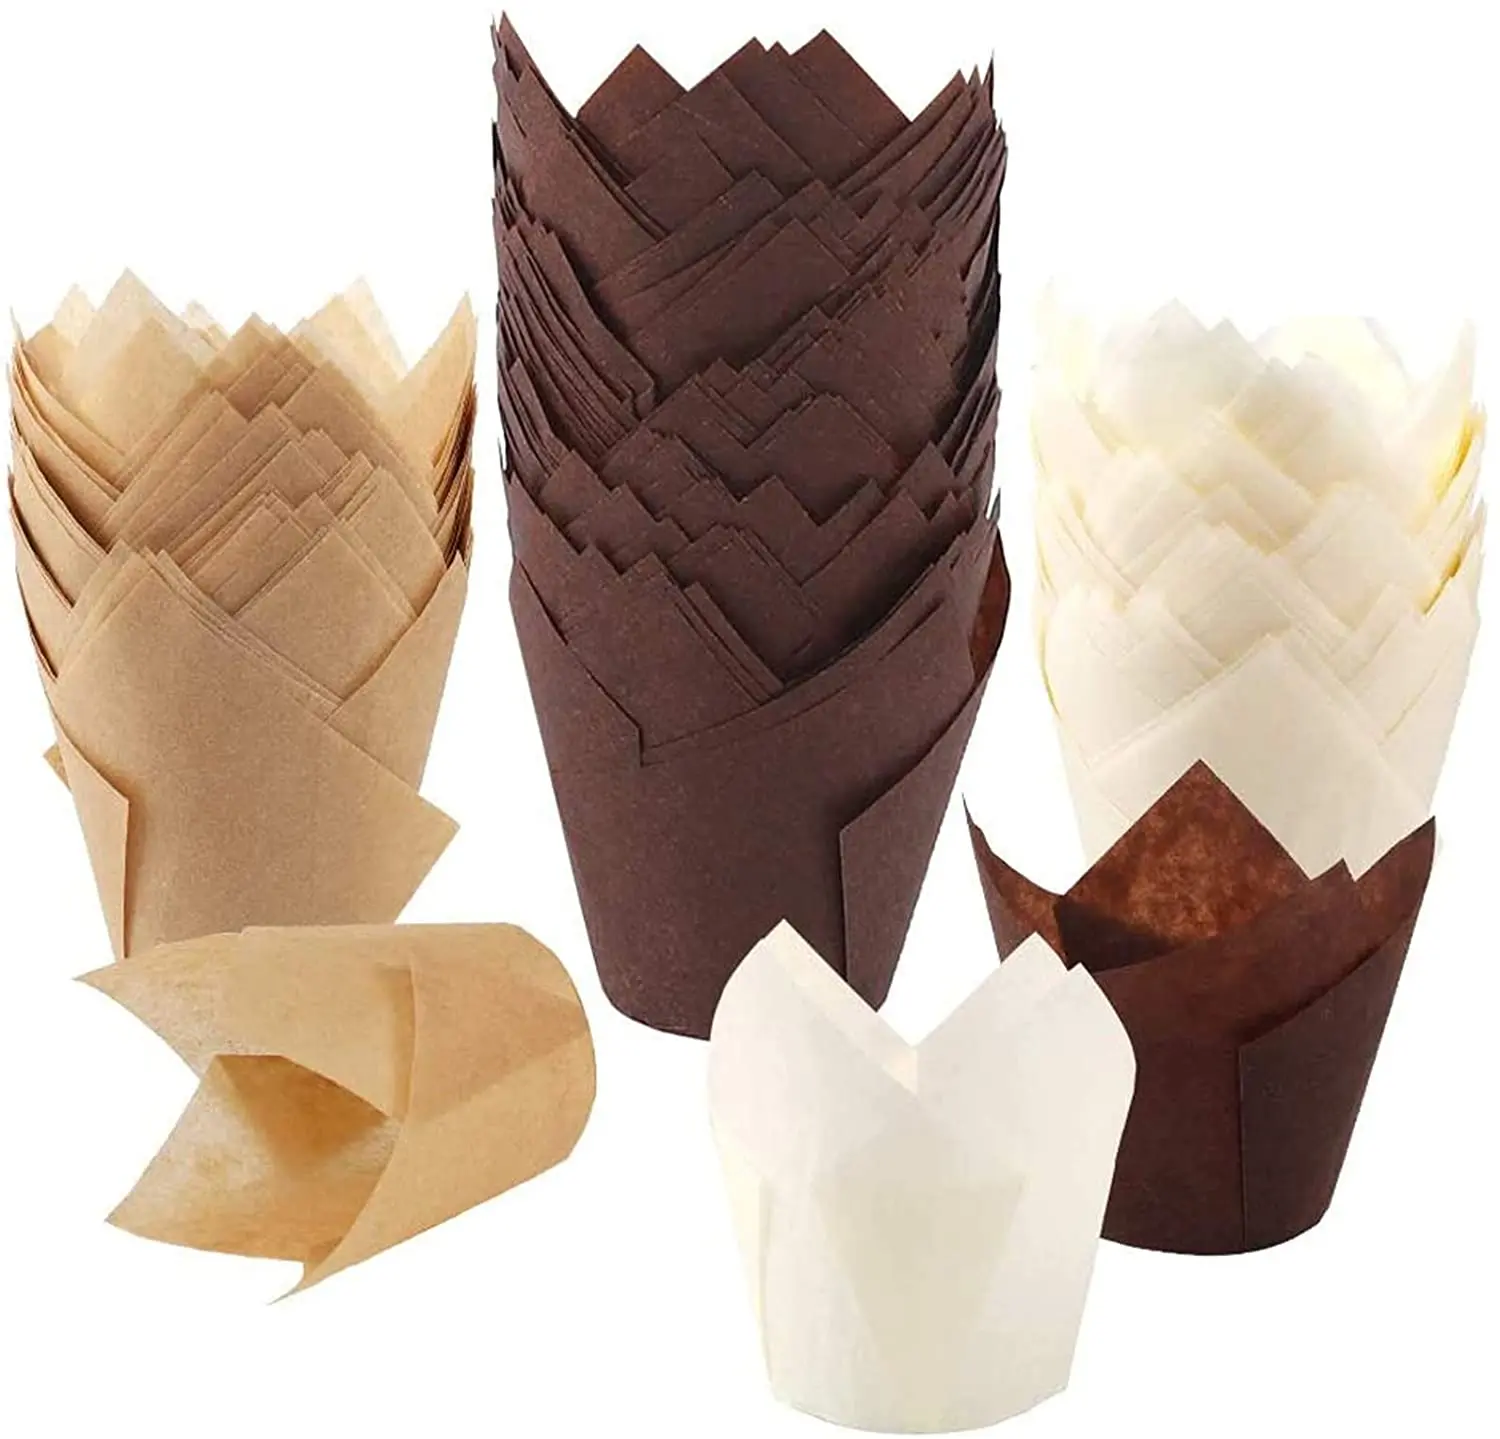 

200pcs Tulip Cupcake Baking Cups, Muffin Baking Liners Holders, Rustic Cupcake Wrapper, Brown, White and Nature Color